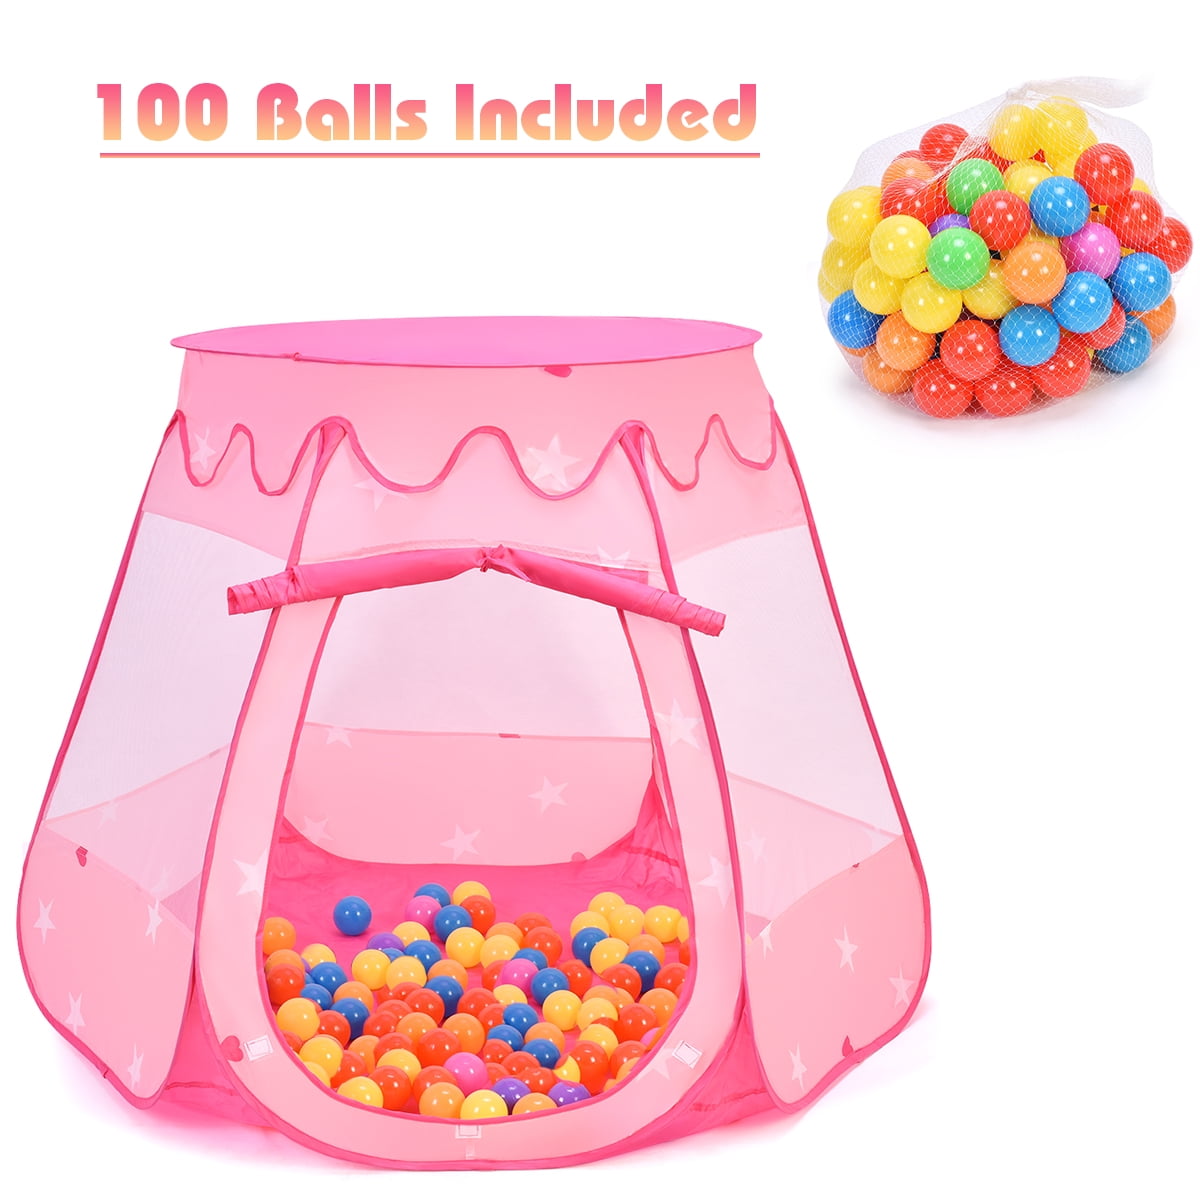 Kids Ball Pit Pop up Play Tent Portable Fun Playhouse Indoor Outdoor Great for sale online 